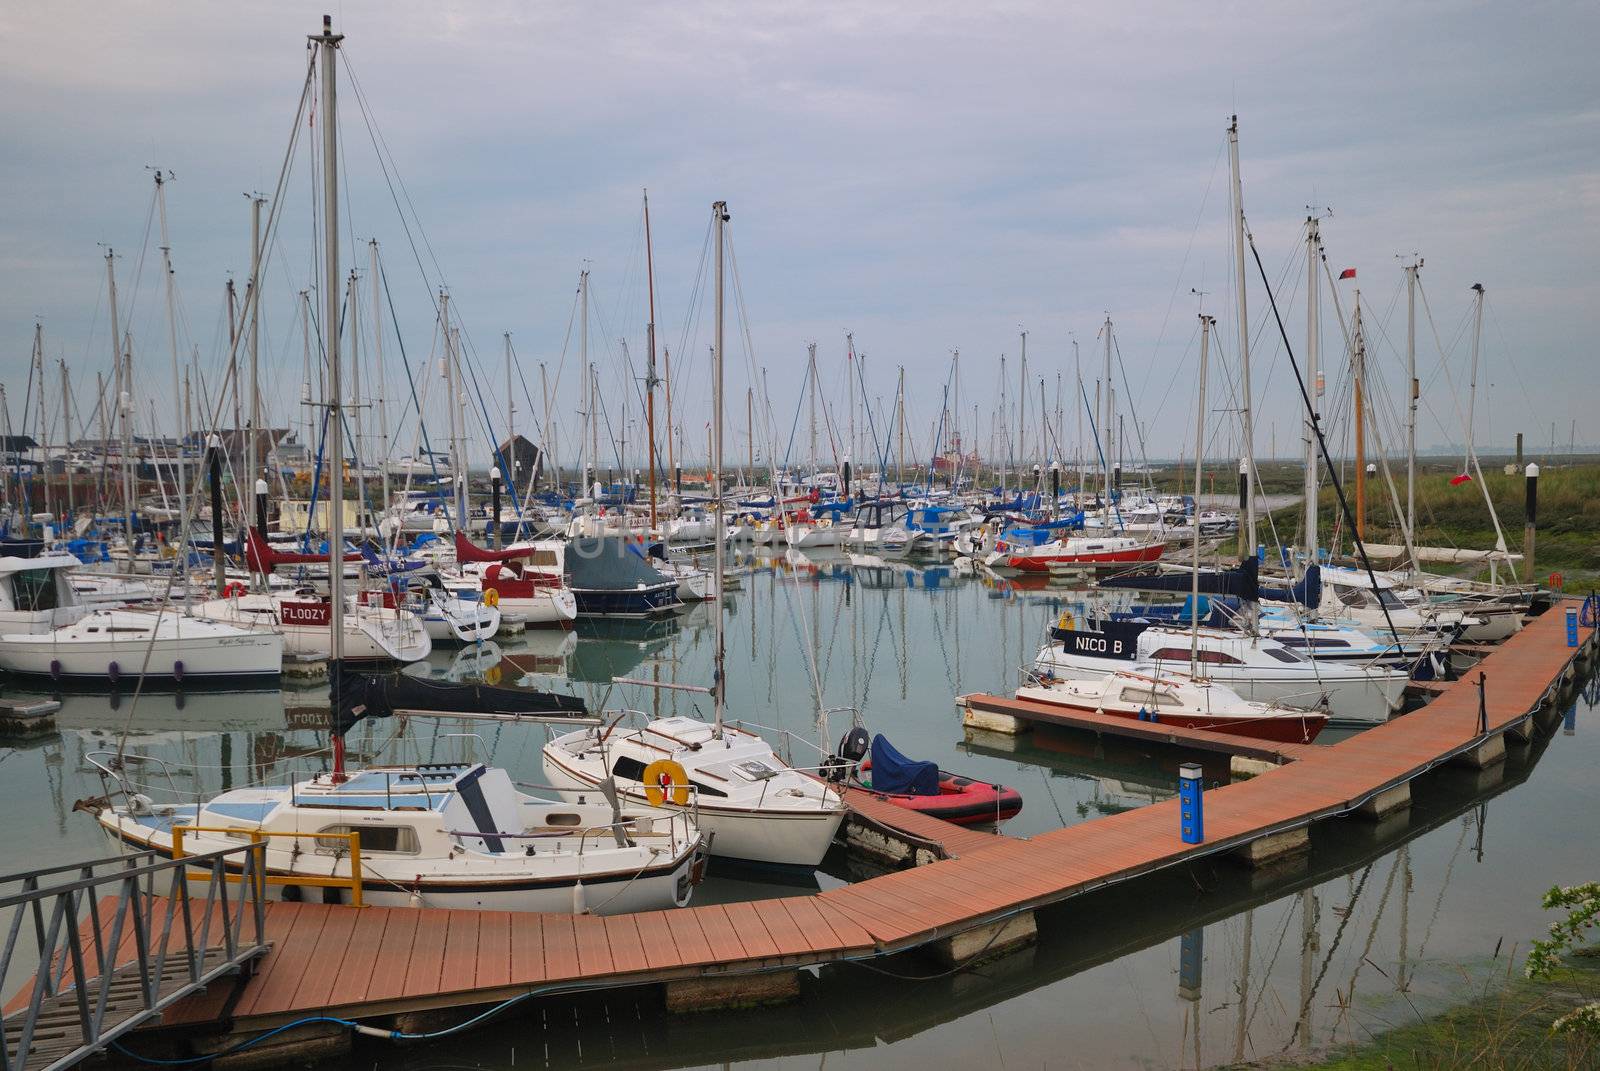 boats in tollesbury marina by pauws99